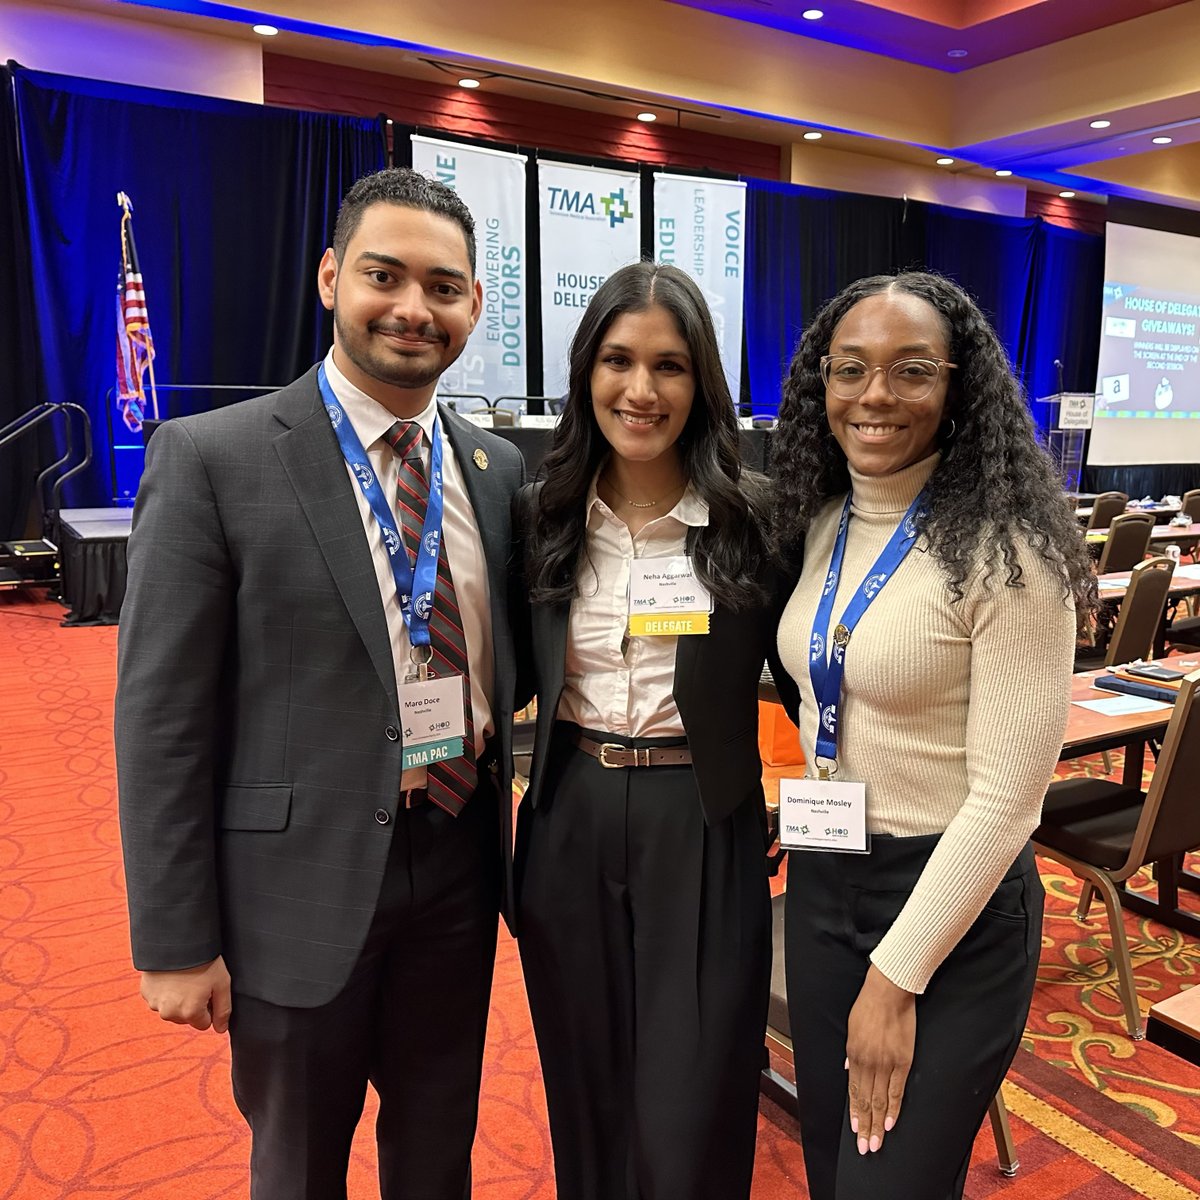 3 of our students dedicated to driving change in #HealthPolicy represented the VUSM chapter of AMA-TMA at the @TNMed House of Delegates on Saturday. M3 Neha Aggarwal presented a resolution on buprenorphine in chronic pain management, which passed with strong support. Great work!